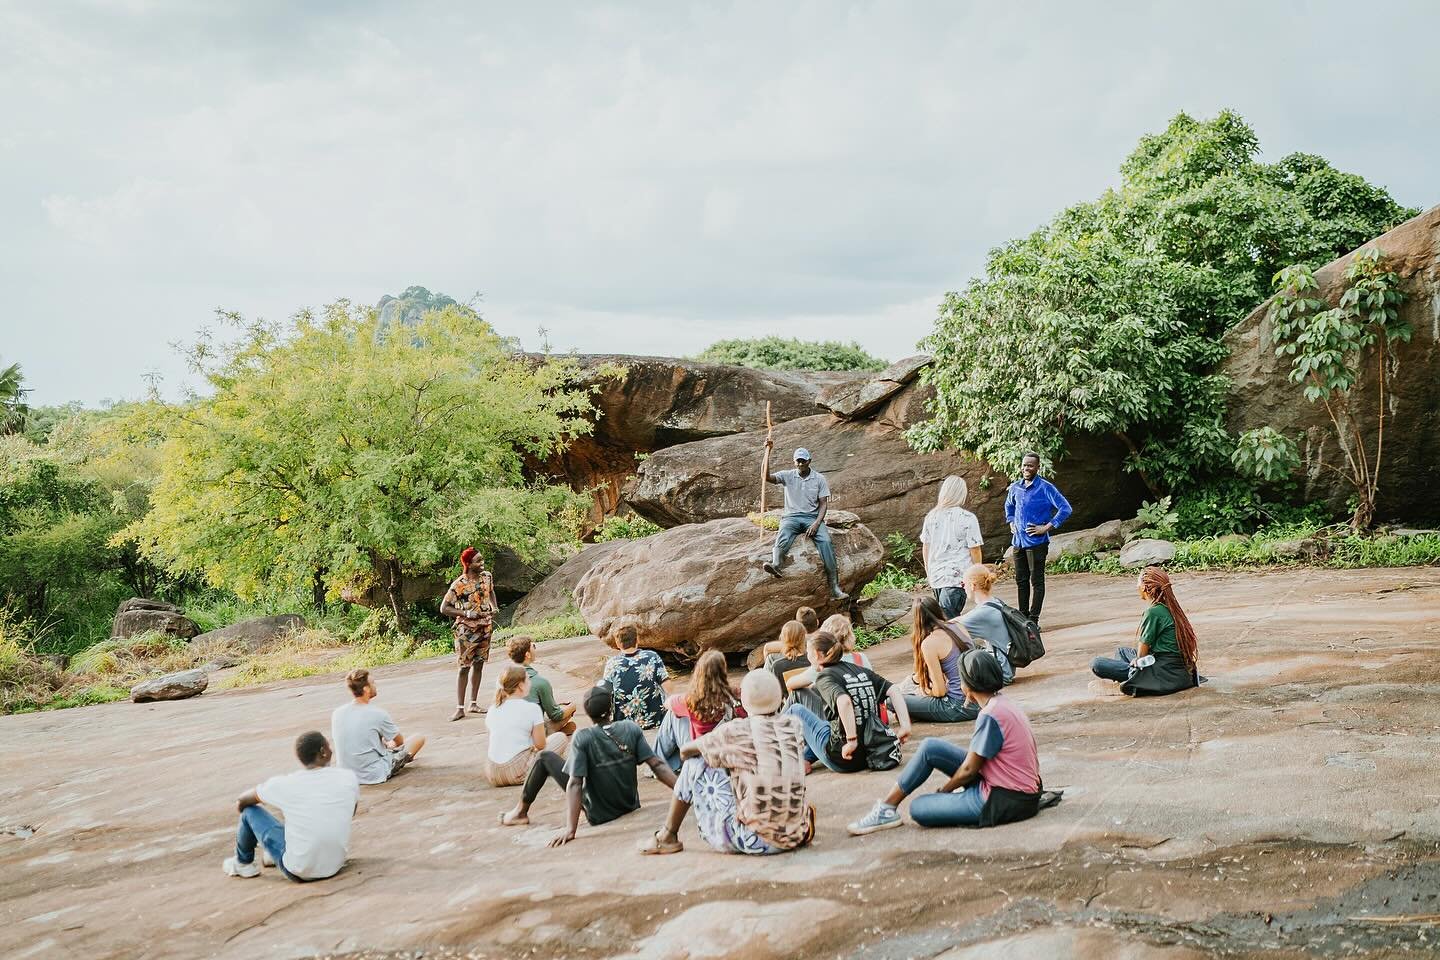 One of our groups recently serving in Uganda had the opportunity to see this former slave trading post. It was a very humbling experience to explore the rock where a &ldquo;judge&rdquo; would decide if you lived or died on the spot (where the man wit